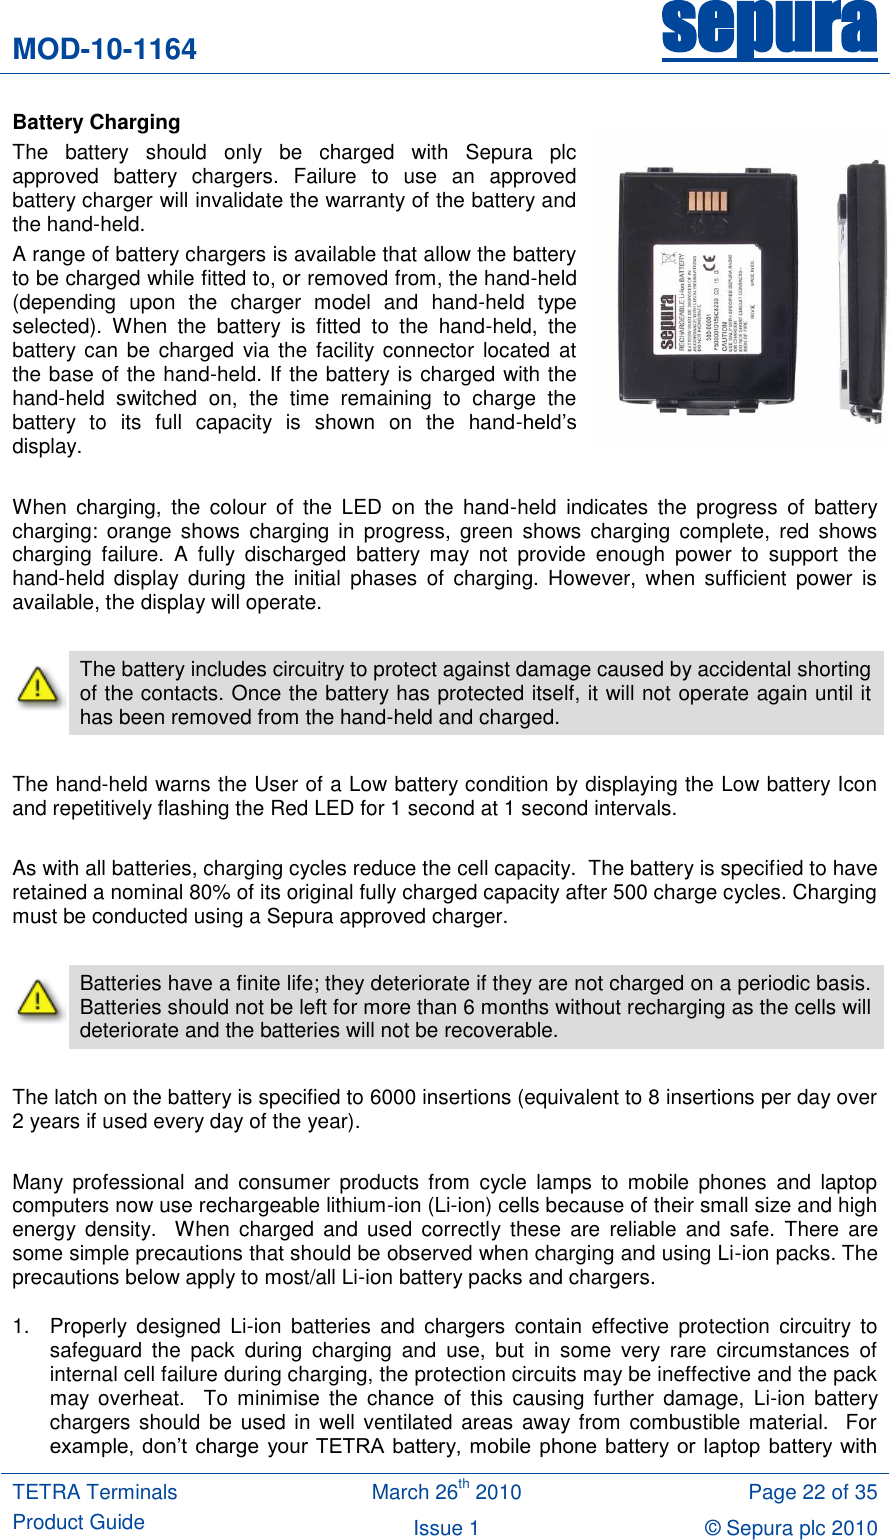 MOD-10-1164 sepura  TETRA Terminals Product Guide March 26th 2010 Page 22 of 35 Issue 1 © Sepura plc 2010   Battery Charging The  battery  should  only  be  charged  with  Sepura  plc approved  battery  chargers.  Failure  to  use  an  approved battery charger will invalidate the warranty of the battery and the hand-held. A range of battery chargers is available that allow the battery to be charged while fitted to, or removed from, the hand-held (depending  upon  the  charger  model  and  hand-held  type selected).  When  the  battery  is  fitted  to  the  hand-held,  the battery can  be  charged via  the facility connector  located at the base of the hand-held. If the battery is charged with the hand-held  switched  on,  the  time  remaining  to  charge  the battery  to  its  full  capacity  is  shown  on  the  hand-held‟s display.  When  charging,  the  colour  of  the  LED  on  the  hand-held  indicates  the  progress  of  battery charging:  orange  shows  charging  in  progress,  green  shows  charging  complete,  red  shows charging  failure.  A  fully  discharged  battery  may  not  provide  enough  power  to  support  the hand-held  display  during  the  initial  phases  of  charging.  However,  when  sufficient  power  is available, the display will operate.   The battery includes circuitry to protect against damage caused by accidental shorting of the contacts. Once the battery has protected itself, it will not operate again until it has been removed from the hand-held and charged.  The hand-held warns the User of a Low battery condition by displaying the Low battery Icon and repetitively flashing the Red LED for 1 second at 1 second intervals.    As with all batteries, charging cycles reduce the cell capacity.  The battery is specified to have retained a nominal 80% of its original fully charged capacity after 500 charge cycles. Charging must be conducted using a Sepura approved charger.   Batteries have a finite life; they deteriorate if they are not charged on a periodic basis.  Batteries should not be left for more than 6 months without recharging as the cells will deteriorate and the batteries will not be recoverable.  The latch on the battery is specified to 6000 insertions (equivalent to 8 insertions per day over 2 years if used every day of the year).   Many  professional  and  consumer  products  from  cycle  lamps  to  mobile  phones  and  laptop computers now use rechargeable lithium-ion (Li-ion) cells because of their small size and high energy  density.    When  charged  and  used  correctly these  are  reliable  and  safe.  There  are some simple precautions that should be observed when charging and using Li-ion packs. The precautions below apply to most/all Li-ion battery packs and chargers. 1.  Properly  designed  Li-ion  batteries  and  chargers  contain  effective  protection  circuitry  to safeguard  the  pack  during  charging  and  use,  but  in  some  very  rare  circumstances  of internal cell failure during charging, the protection circuits may be ineffective and the pack may  overheat.    To  minimise  the  chance  of  this  causing  further  damage,  Li-ion  battery chargers should be used in well ventilated areas  away from combustible material.  For example,  don‟t  charge  your TETRA battery, mobile phone  battery or laptop  battery with 